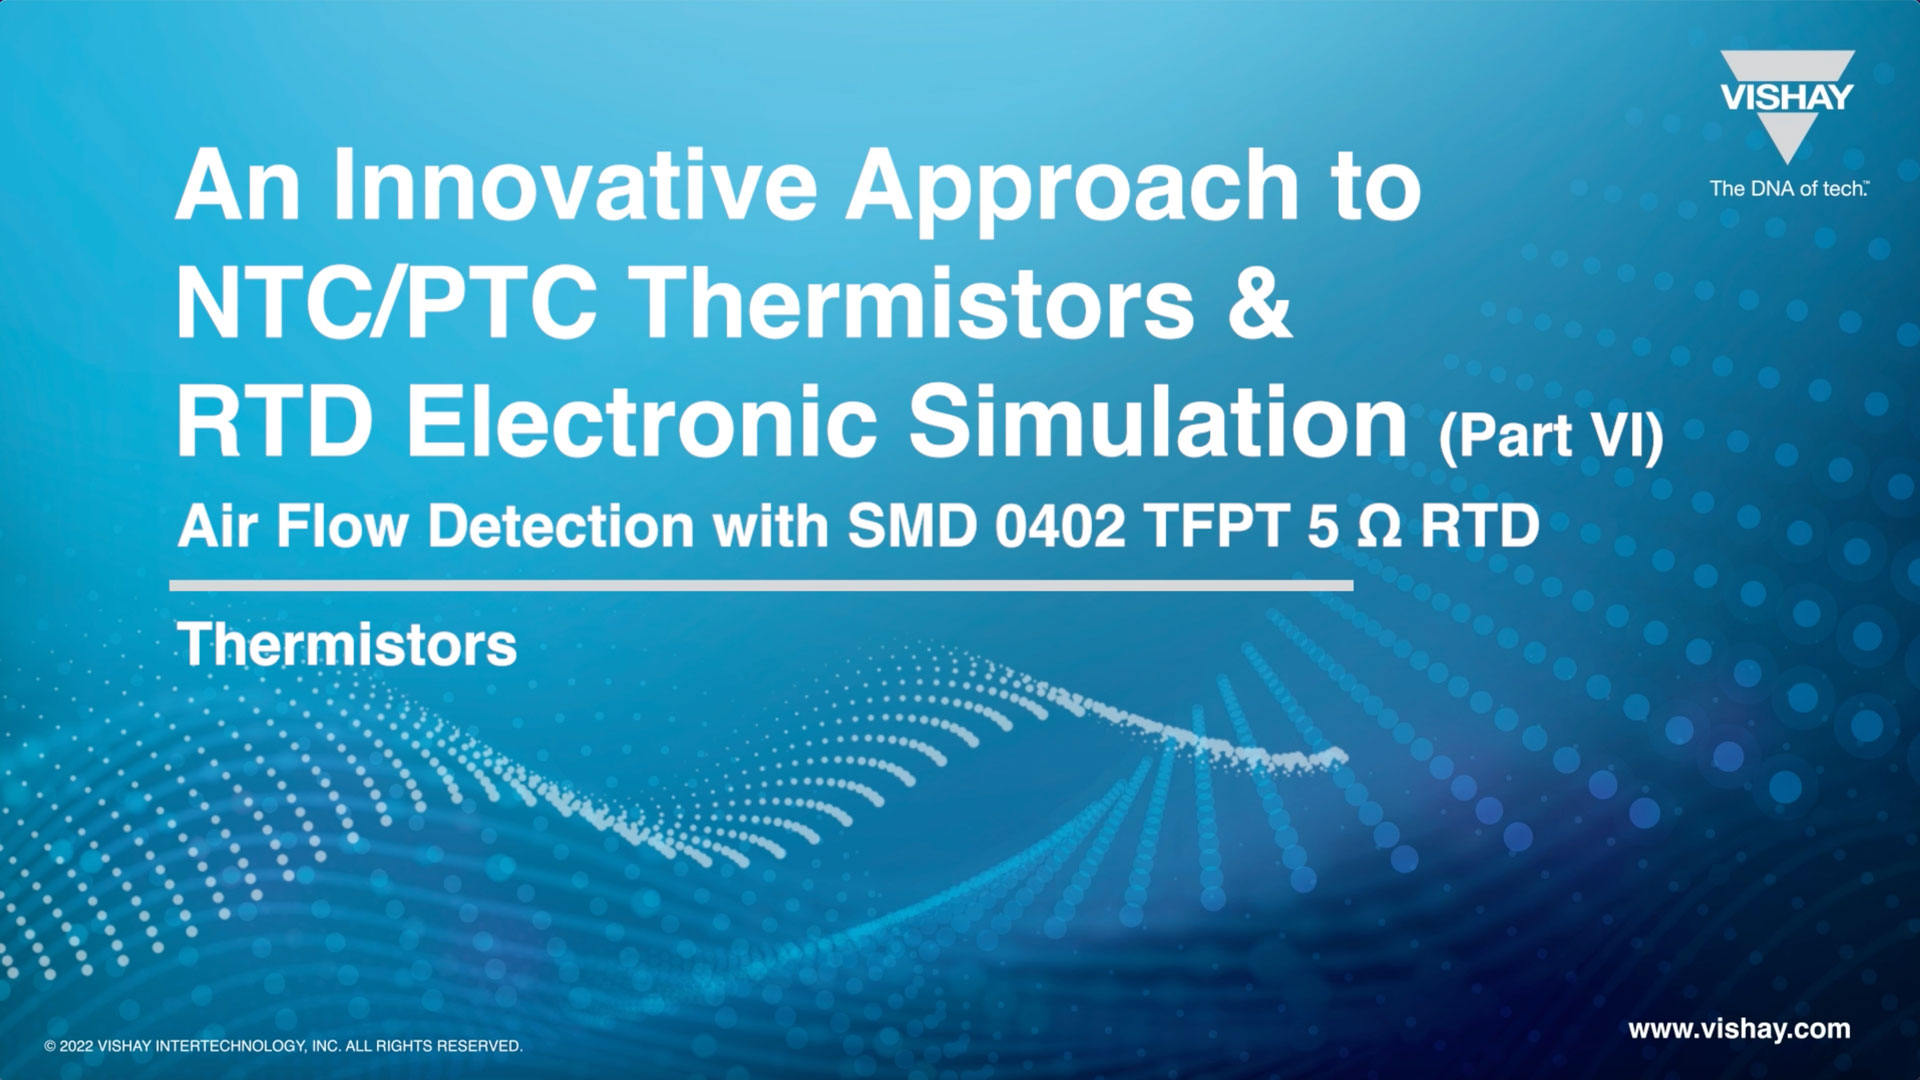 Vishay Thermistors Electronic Simulation Part 6: Air flow detection with SMD 0402 TFPT; 5Ω RTD